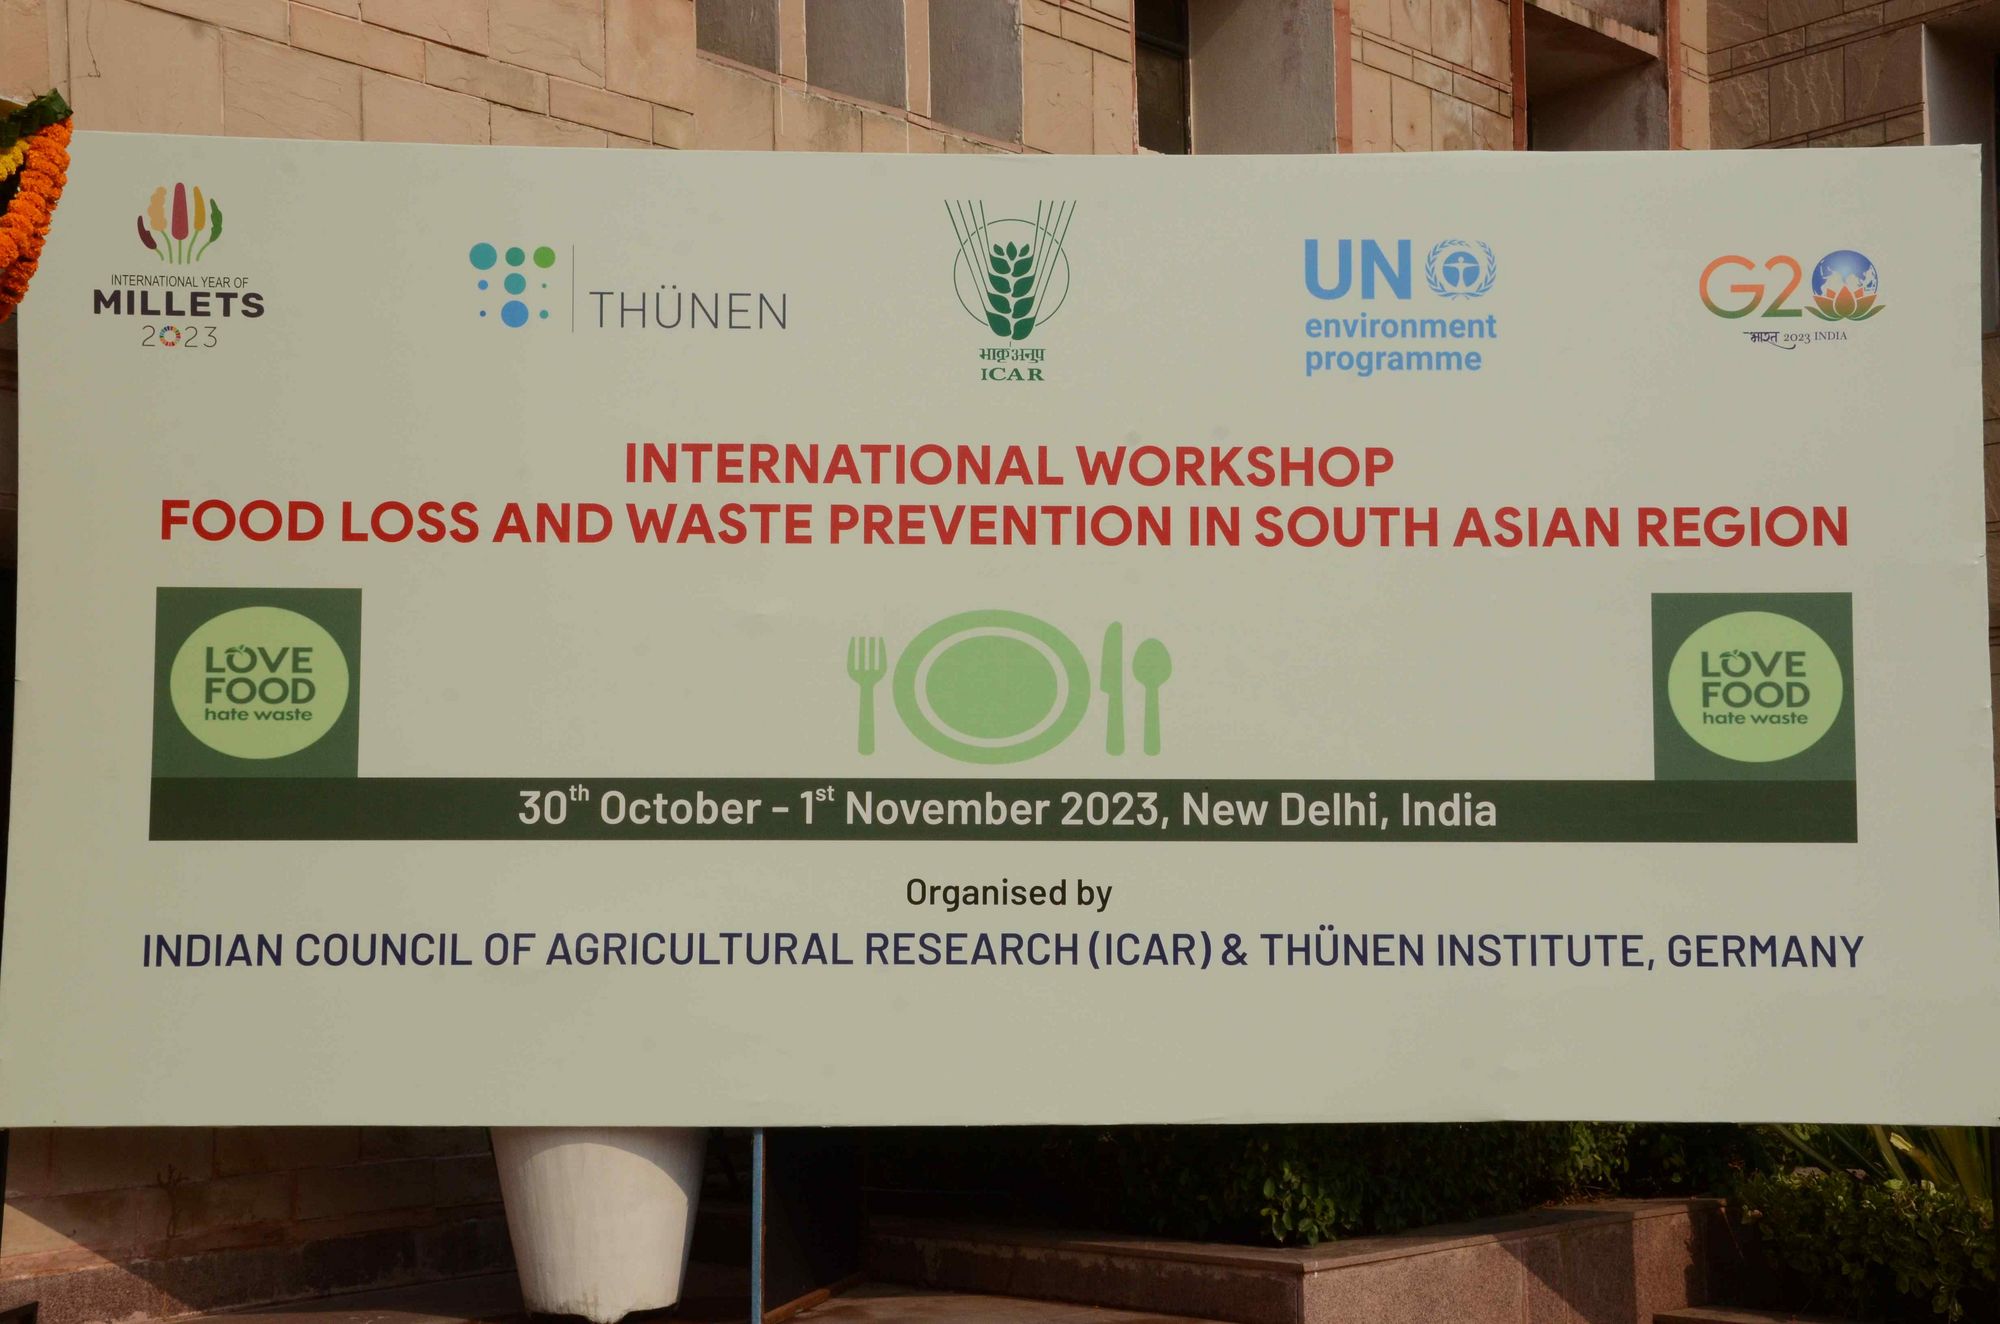 The banner of the International Workshop Food Loss and Waste Prevention in South Asian Region located at the venue entrance.